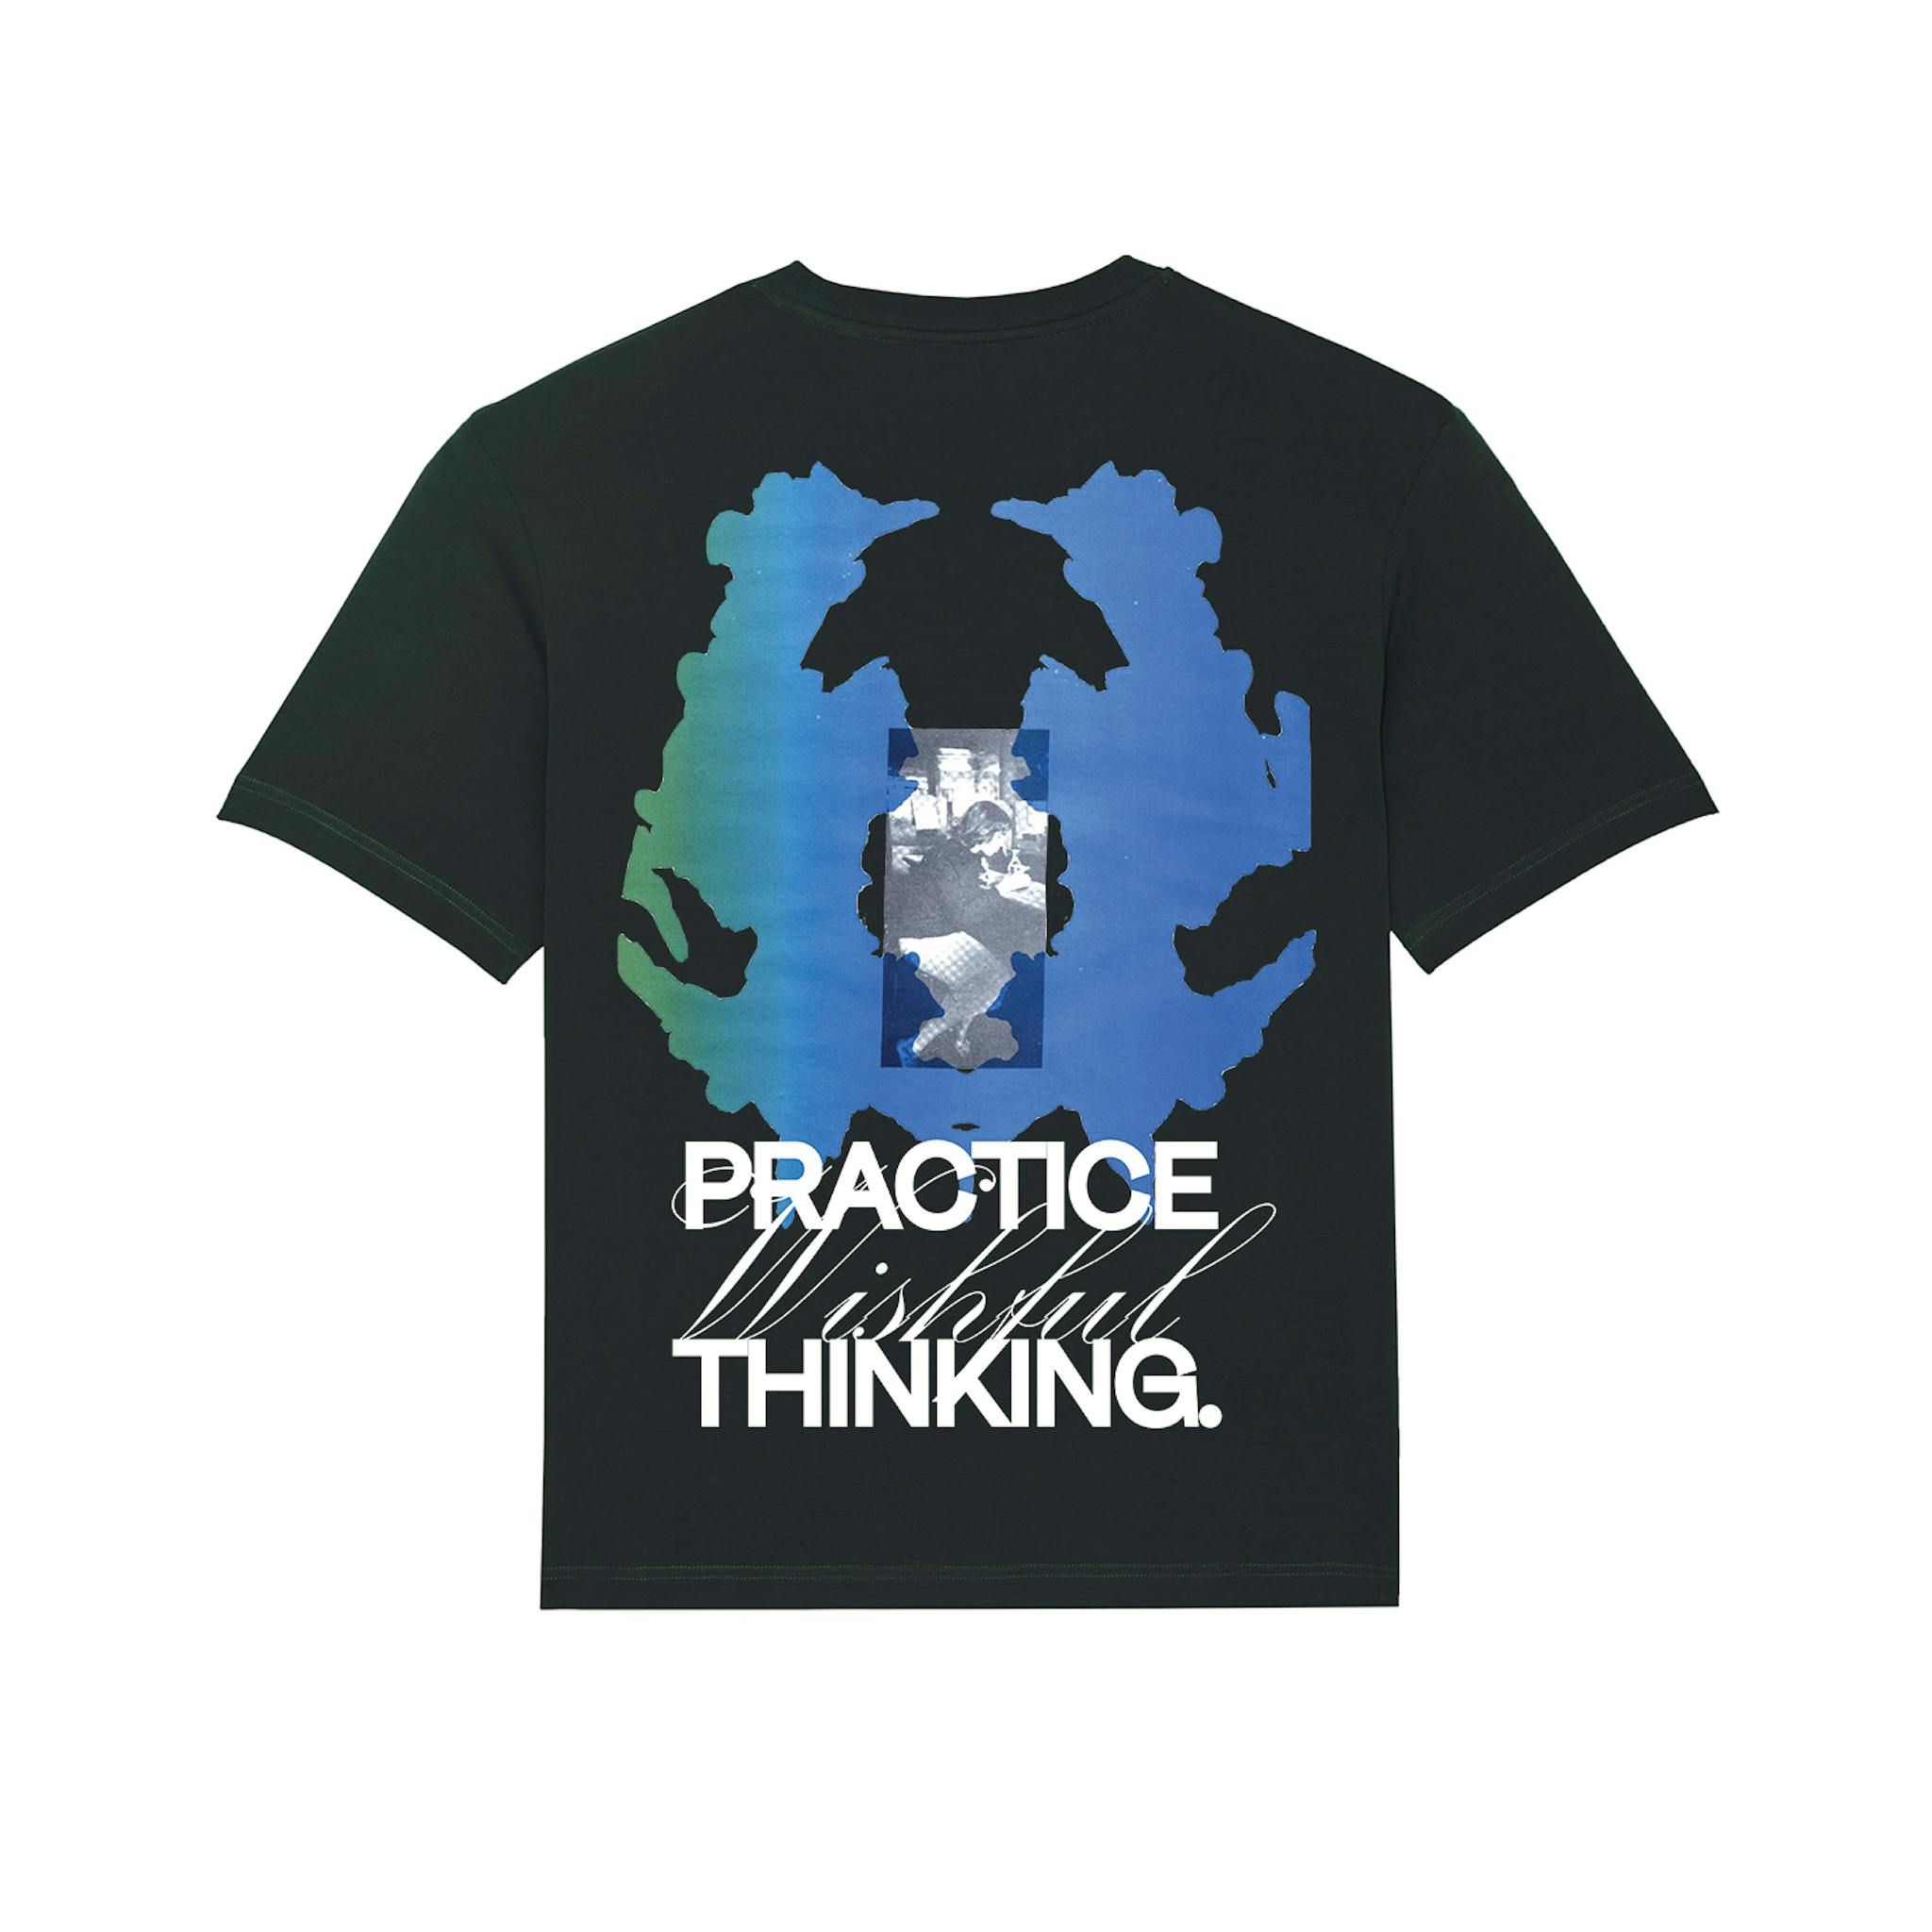 A black T-shirt with a large blue and green  graphic and text on the back saying "Practice Wishful Thinking"